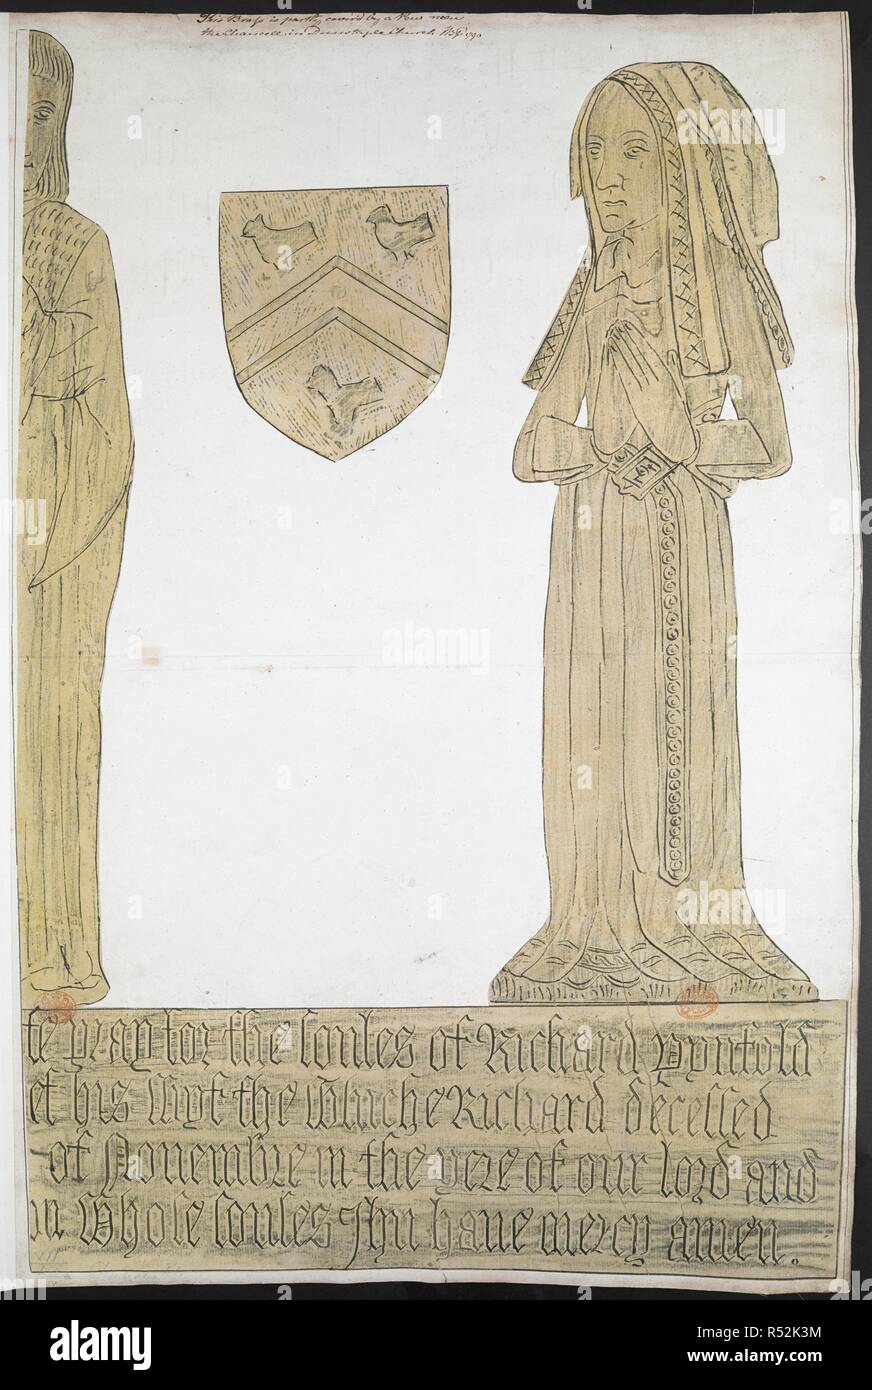 Two brass rubbings of a monumental brass depicting a man, a women, a coat of arms and an inscription plaque from The Priory Church of St Peter, Dunstable. The male figure is only partially depicted. This Brass is partly cover'd by a Pew near the Chancell in Dunstable Church. 1790. Pen and black ink with black crayon. Source: Maps K.Top.7.6.a.4. Language: English. Author: Baskerfield, Thomas. Stock Photo